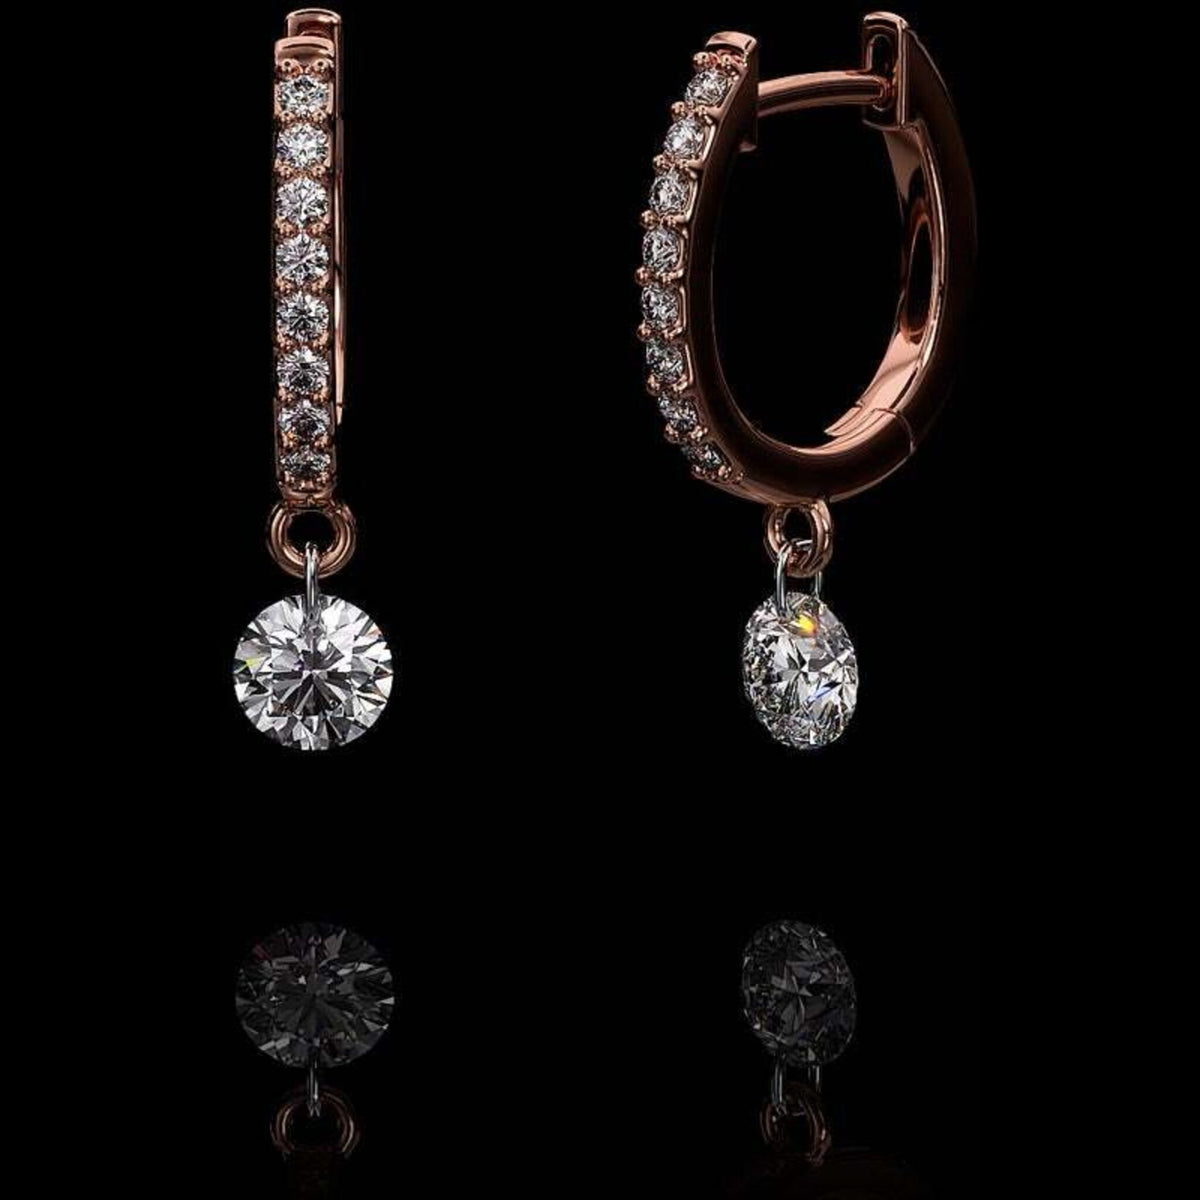 Aresa New York - Beauvoir No. 1 Earrings - 18K Rose Gold with 0.50 cts. of Diamonds